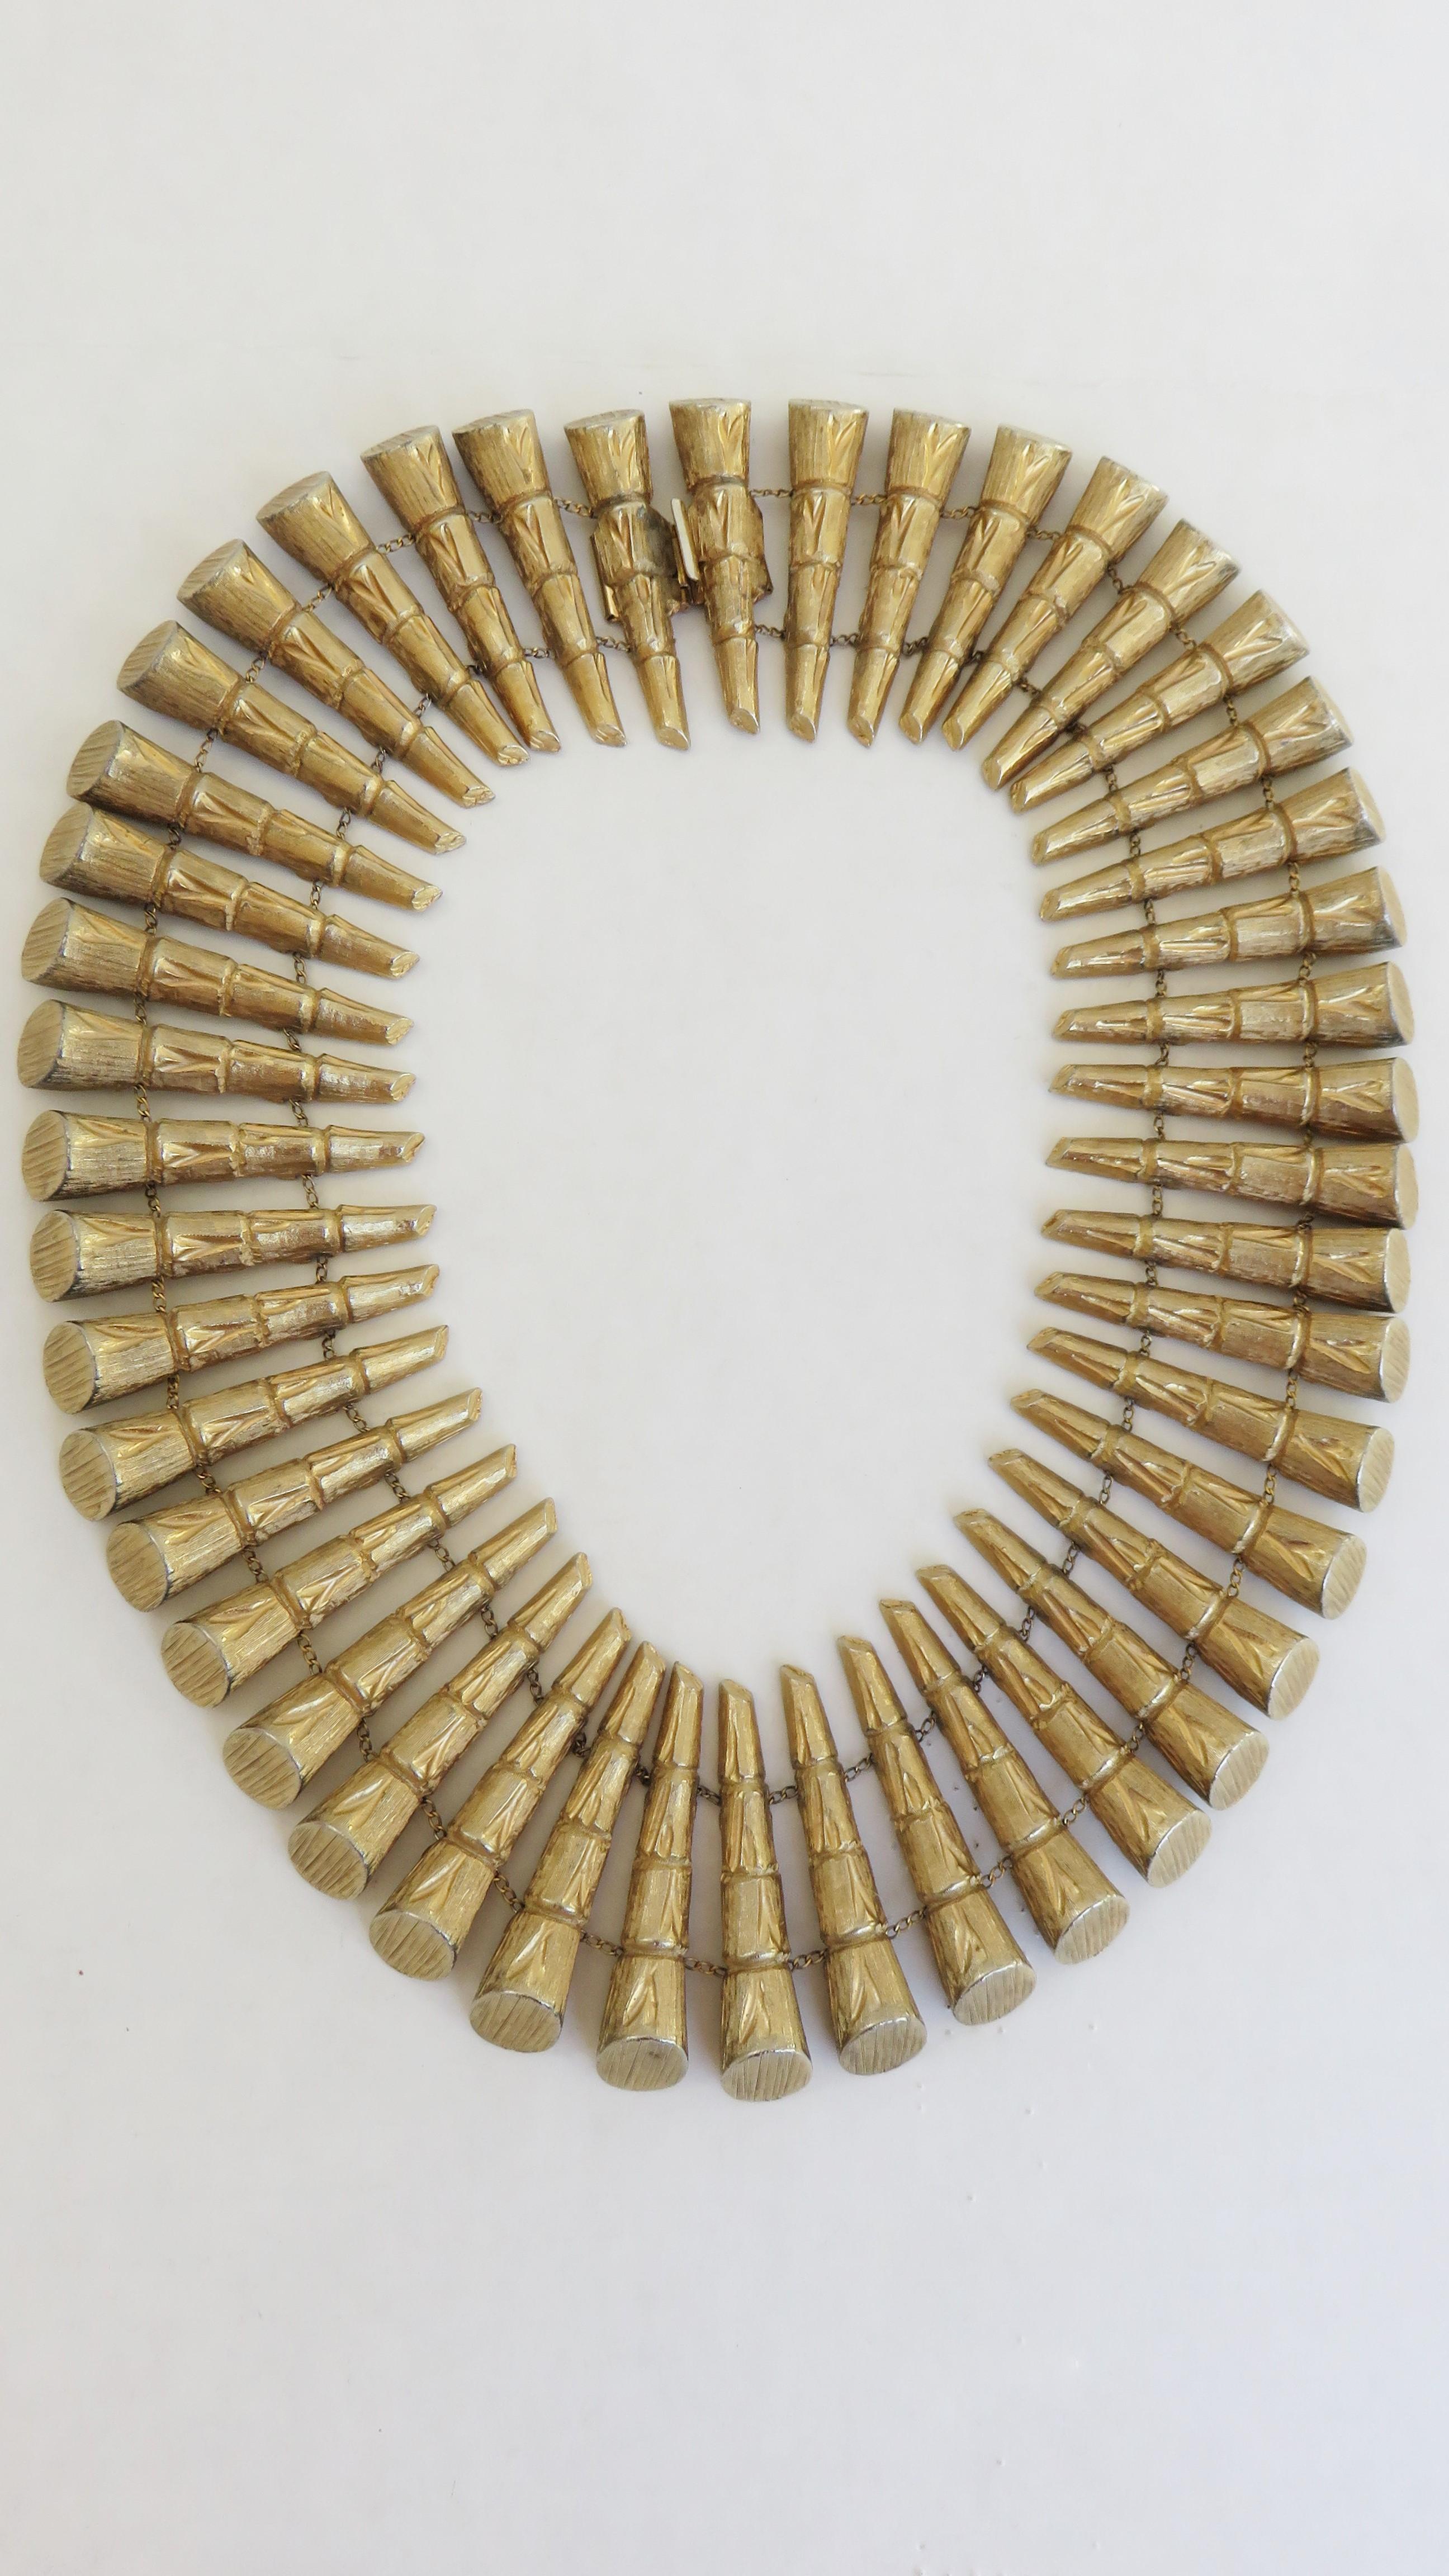 Les Bernard Egyptian Revival Collar Necklace 1970s In Excellent Condition For Sale In Water Mill, NY